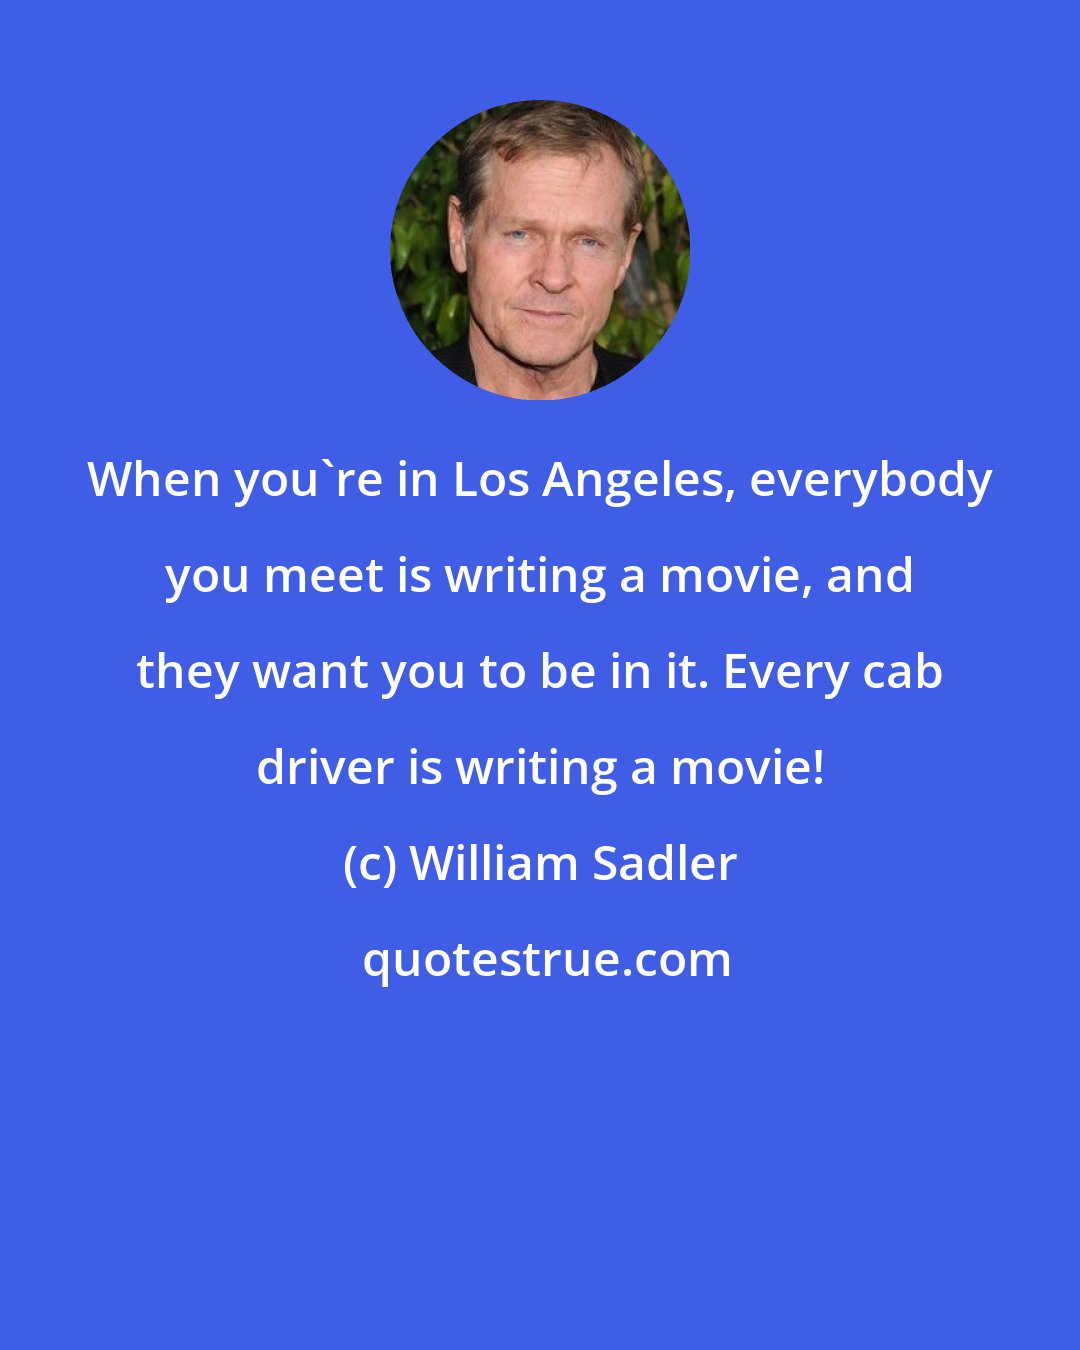 William Sadler: When you're in Los Angeles, everybody you meet is writing a movie, and they want you to be in it. Every cab driver is writing a movie!